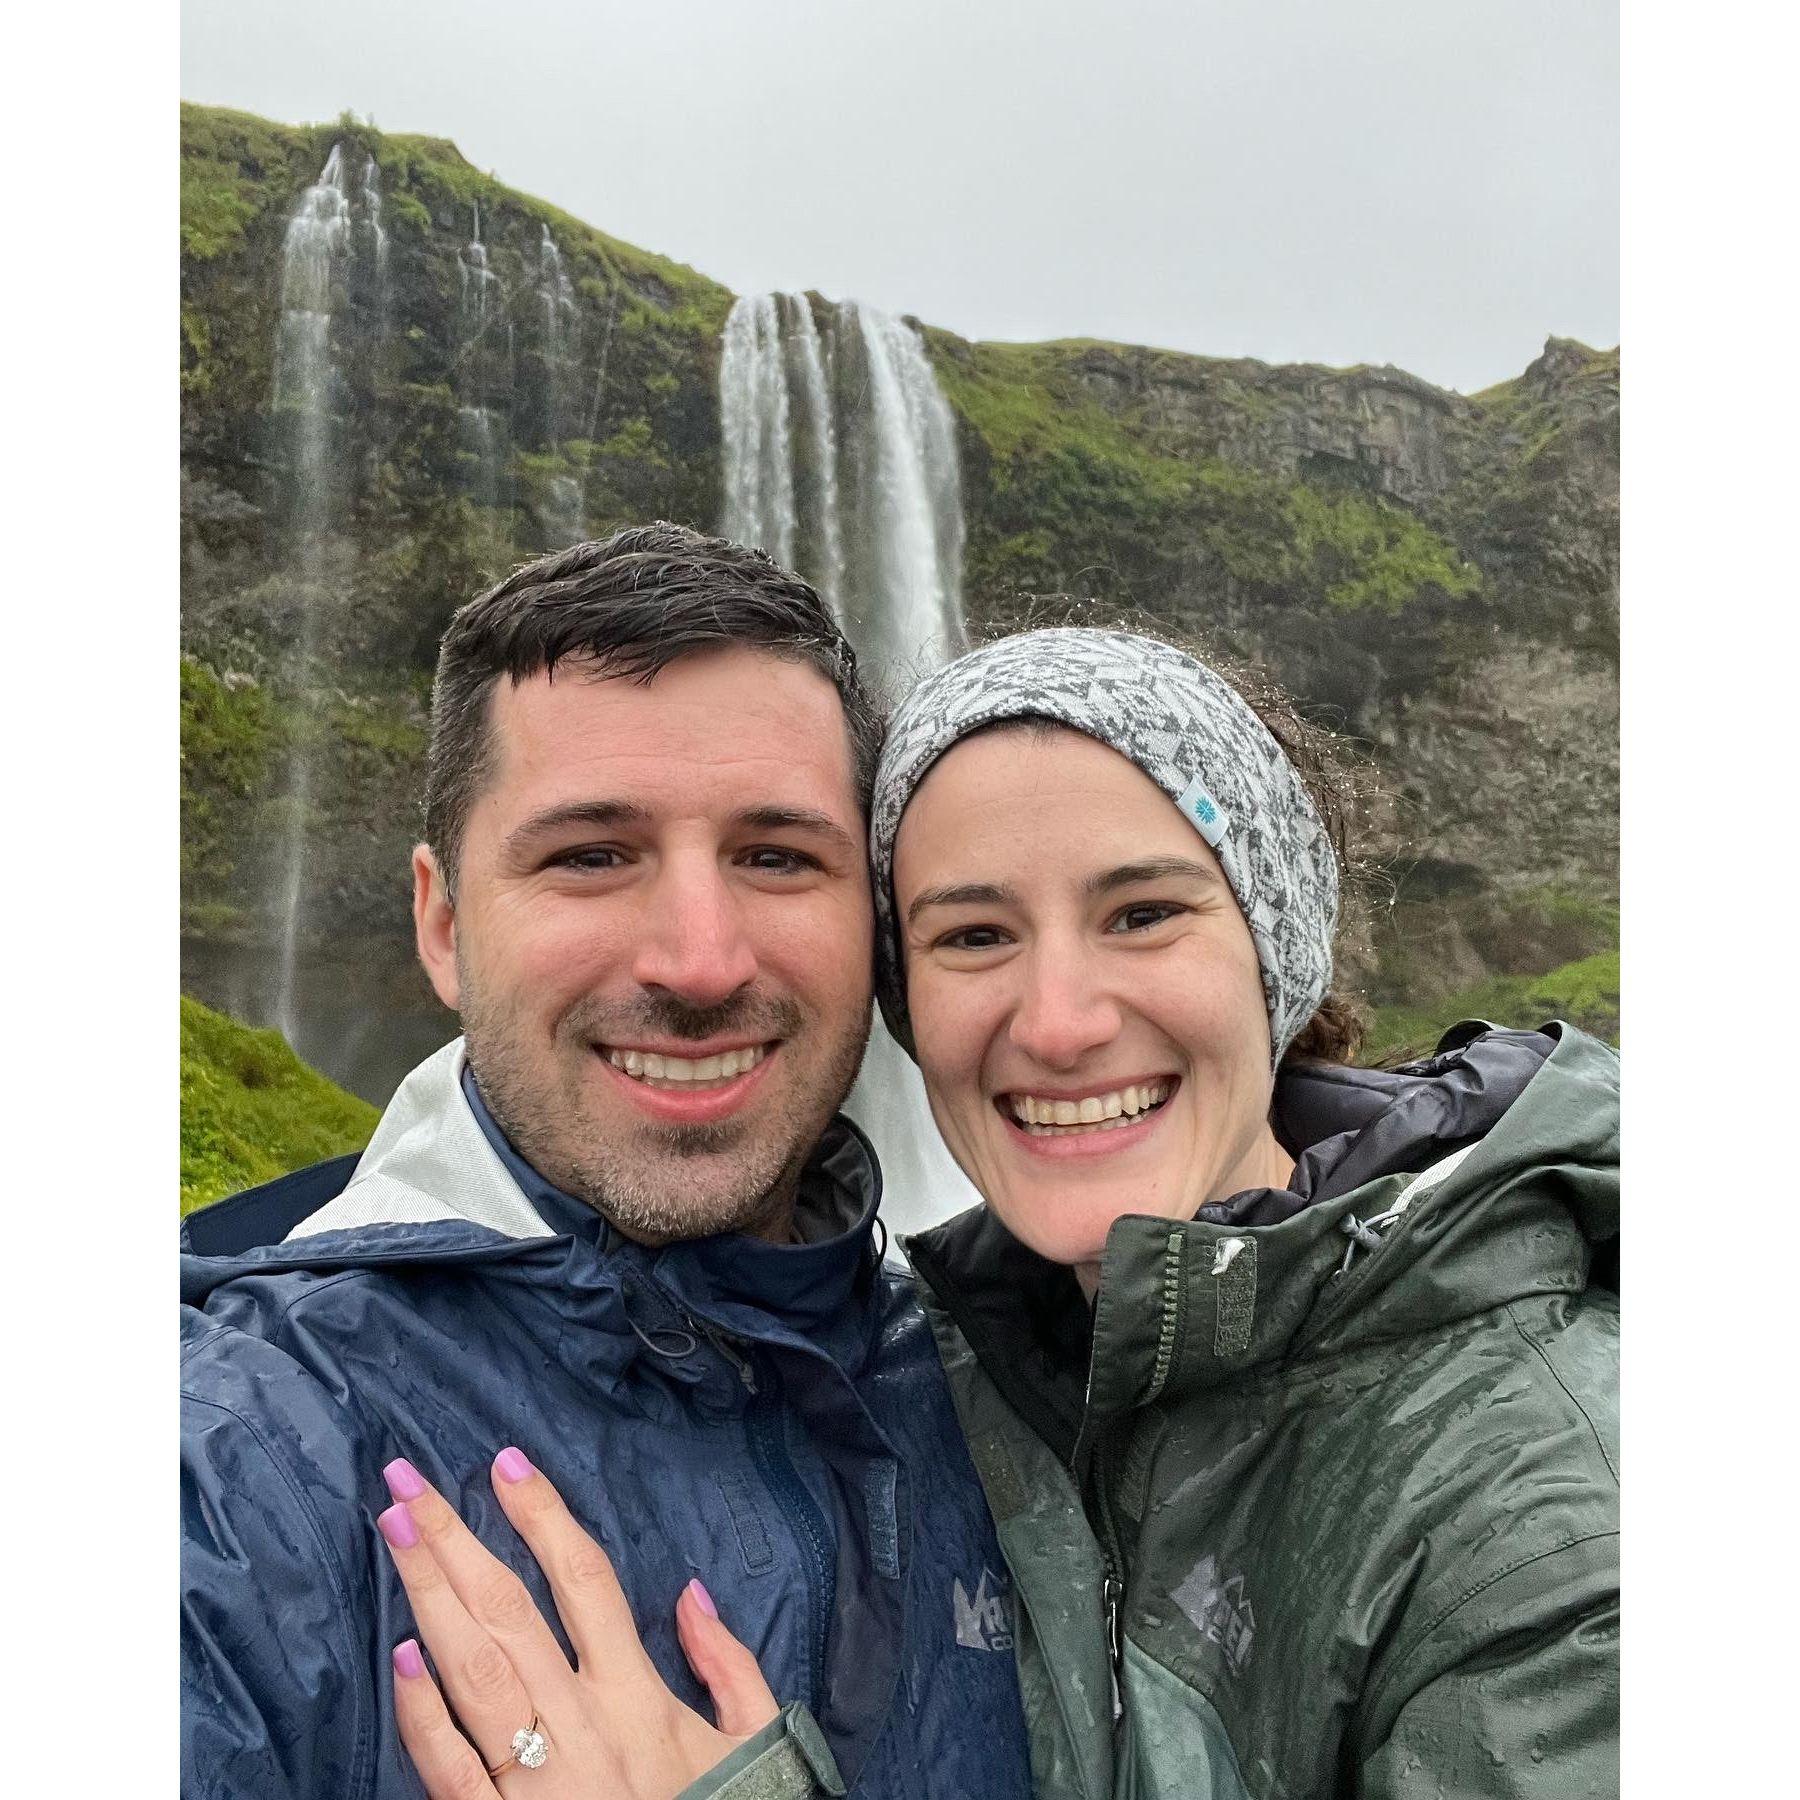 Right after we got engaged behind the waterfall in Iceland